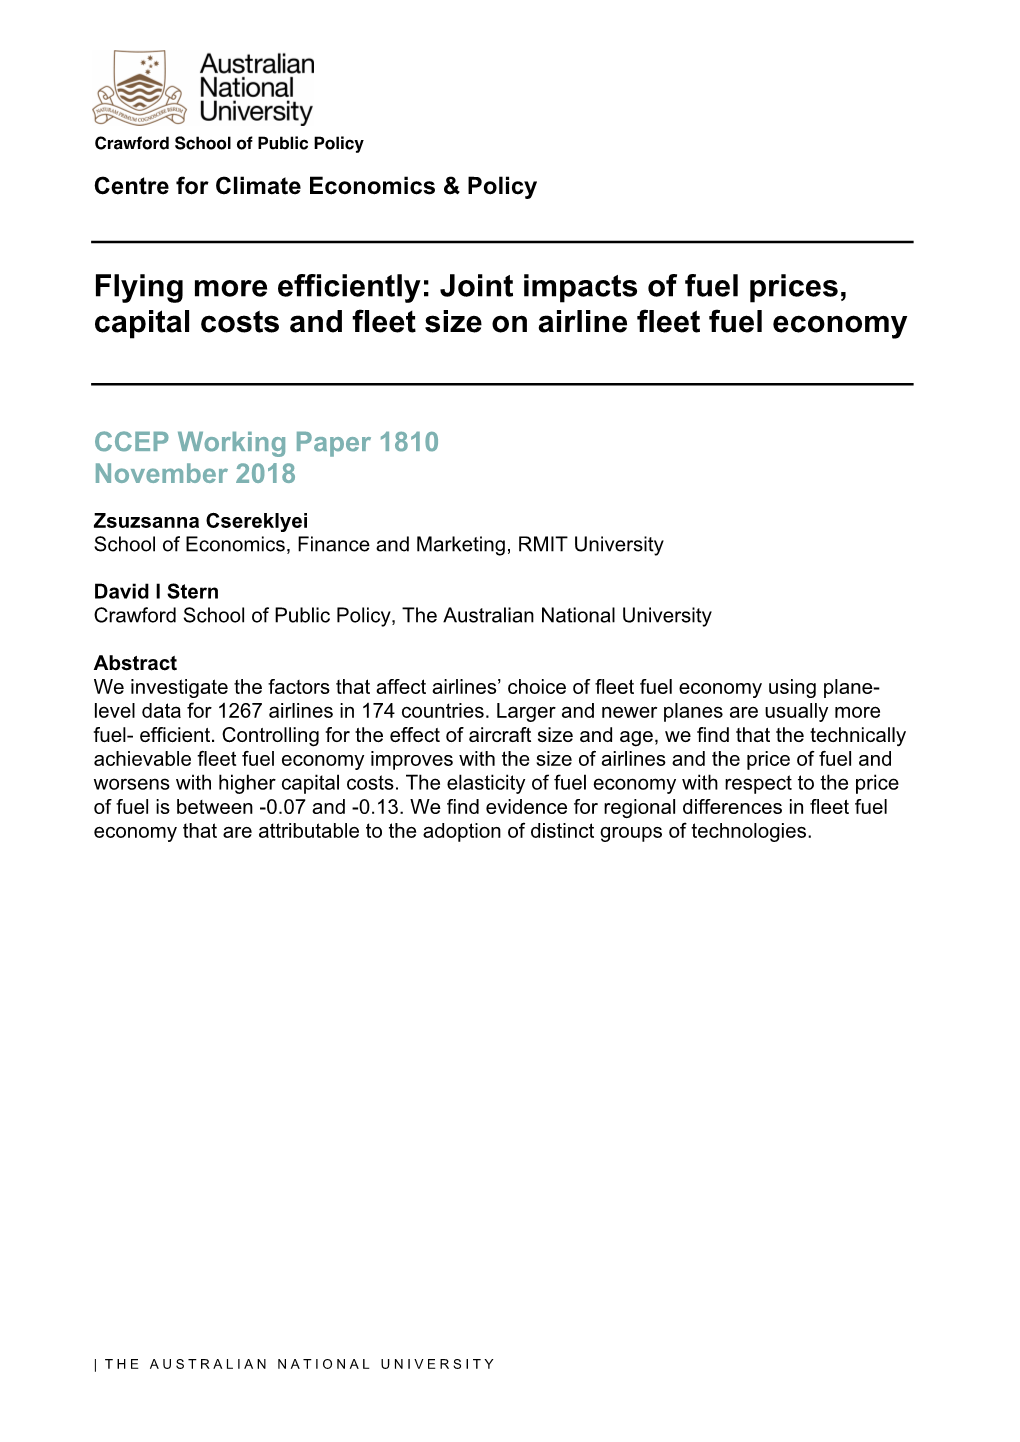 Flying More Efficiently: Joint Impacts of Fuel Prices, Capital Costs and Fleet Size on Airline Fleet Fuel Economy